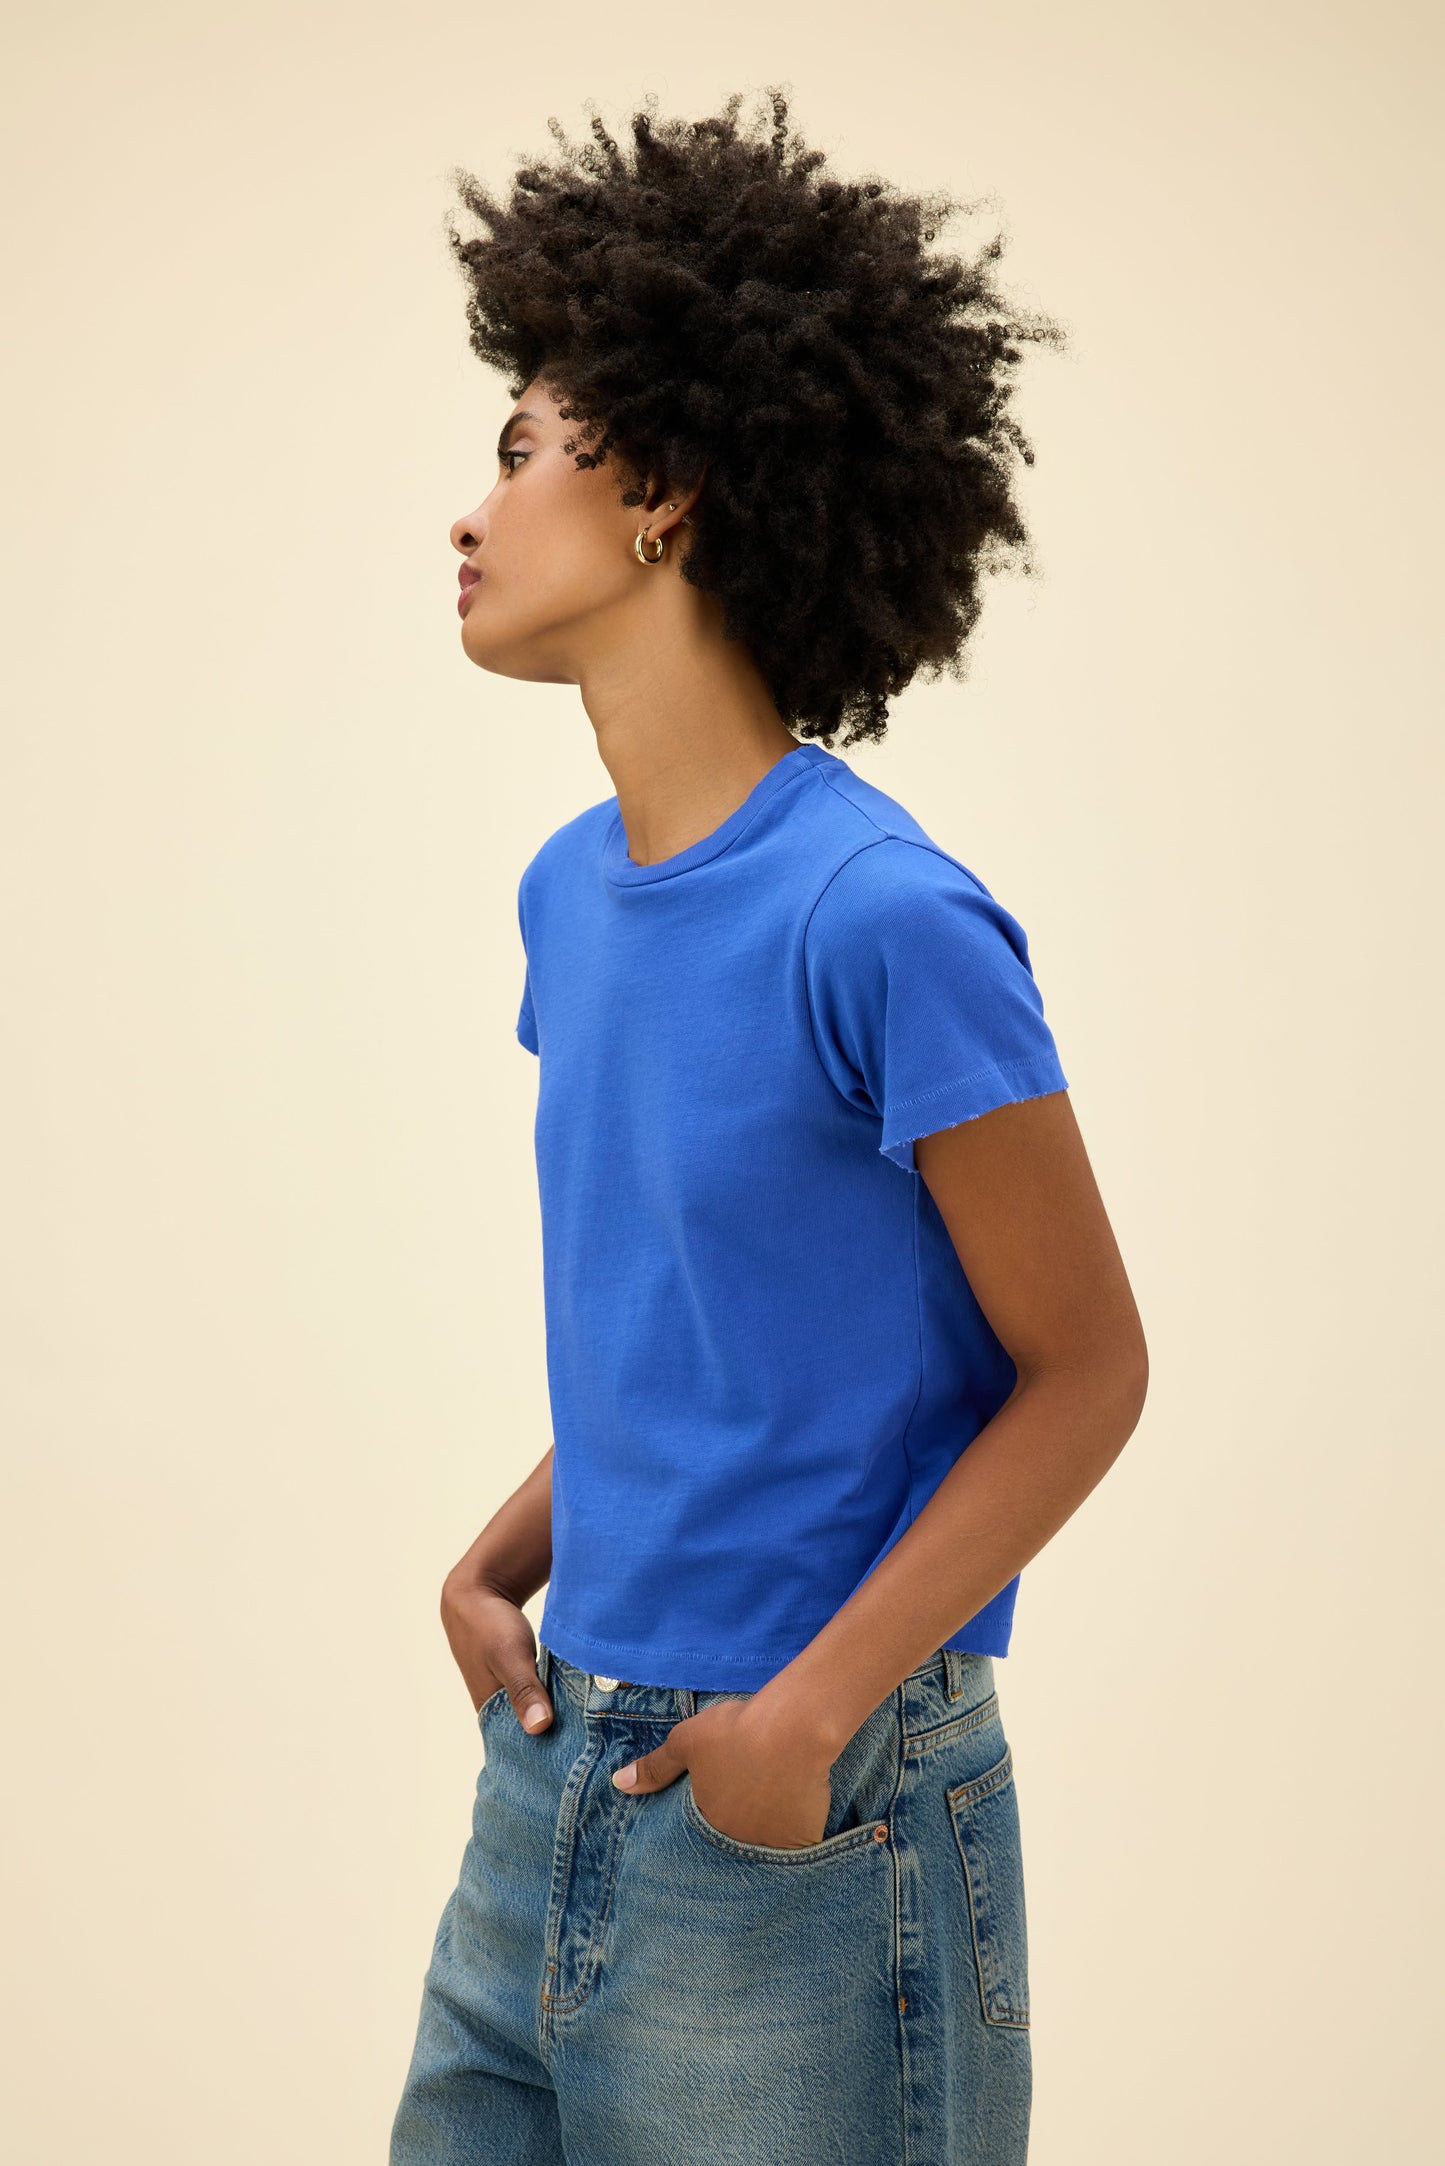 A model featuring a vintage tee in ultra marine.